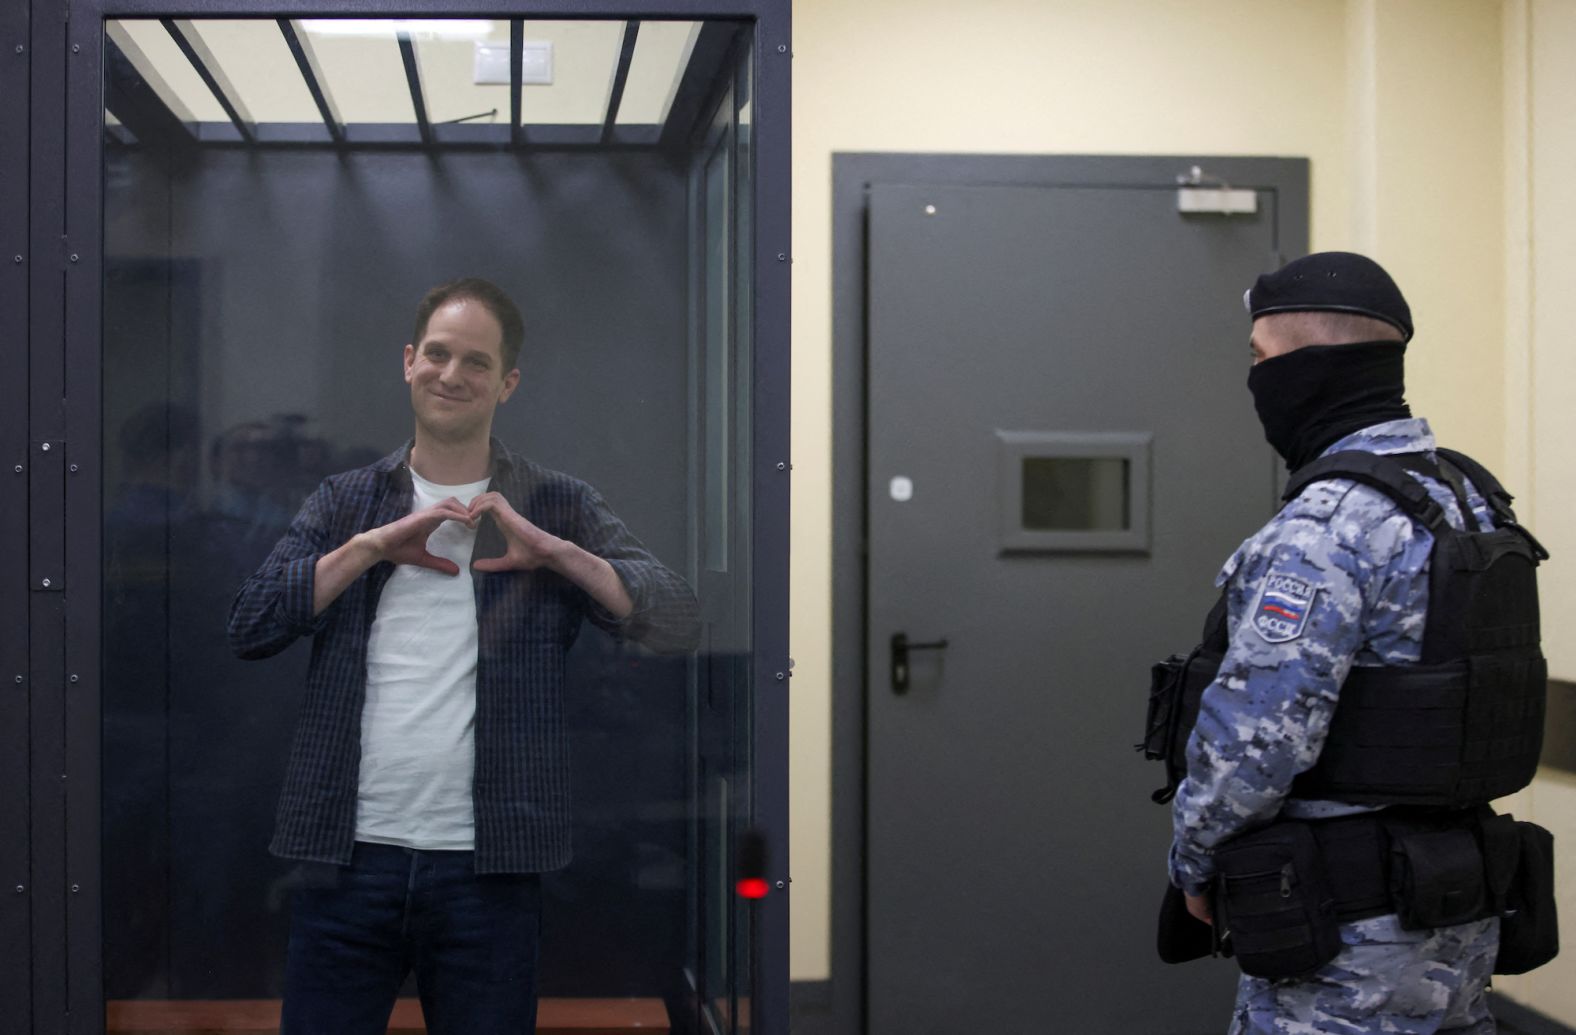 Wall Street Journal reporter Evan Gershkovich makes a heart-shaped gesture inside a defendants cage before a court hearing in Moscow on Tuesday, April 23. <a href="index.php?page=&url=https%3A%2F%2Fwww.cnn.com%2F2024%2F03%2F29%2Fpolitics%2Fevan-gershkovich-one-year-russian-detention%2Findex.html" target="_blank">Gershkovich has spent over a year in Russian detention</a>. He is being held on espionage charges, which he and his employer vehemently contest.